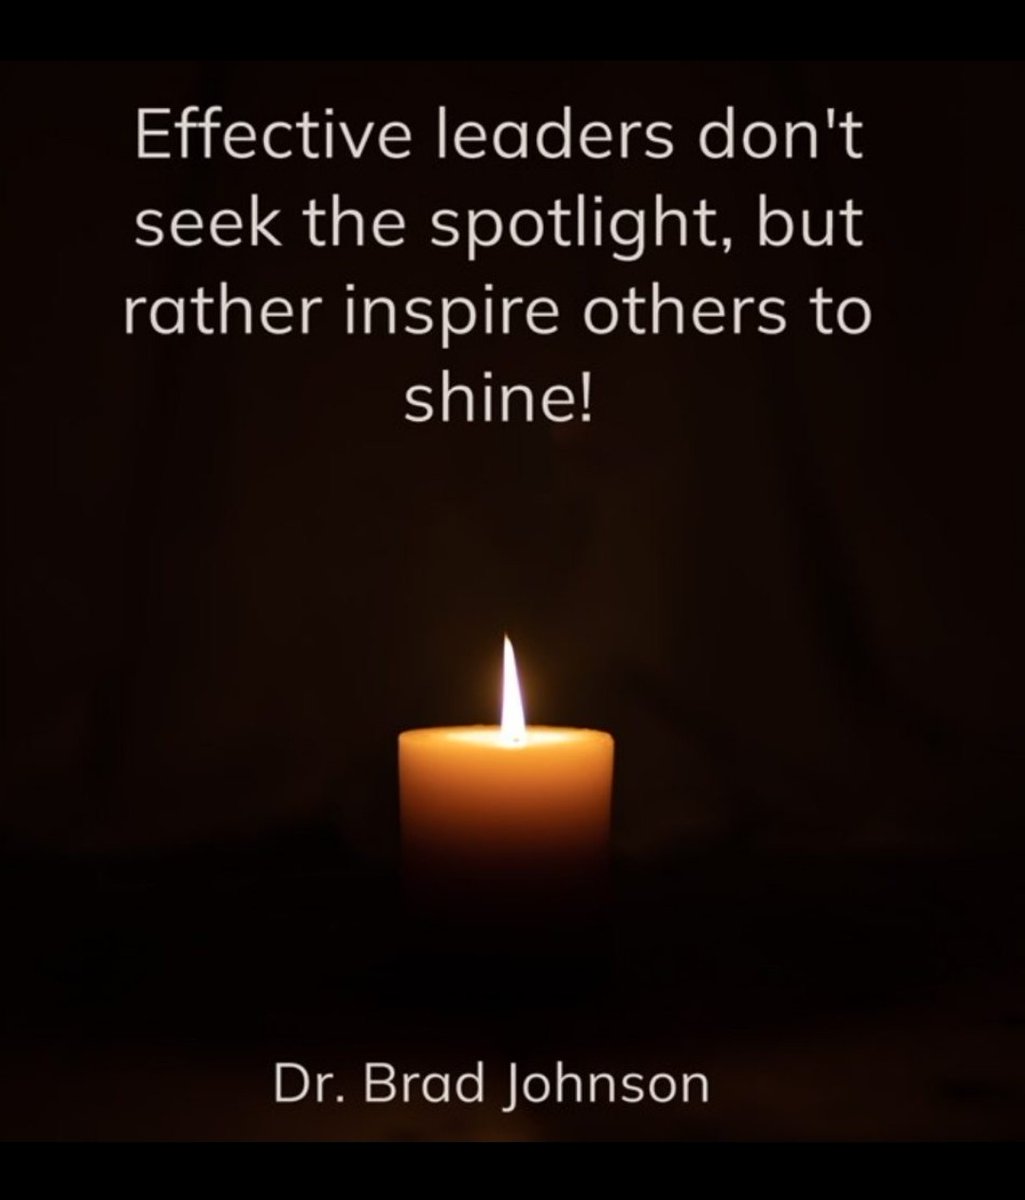 Inspire others to shine!